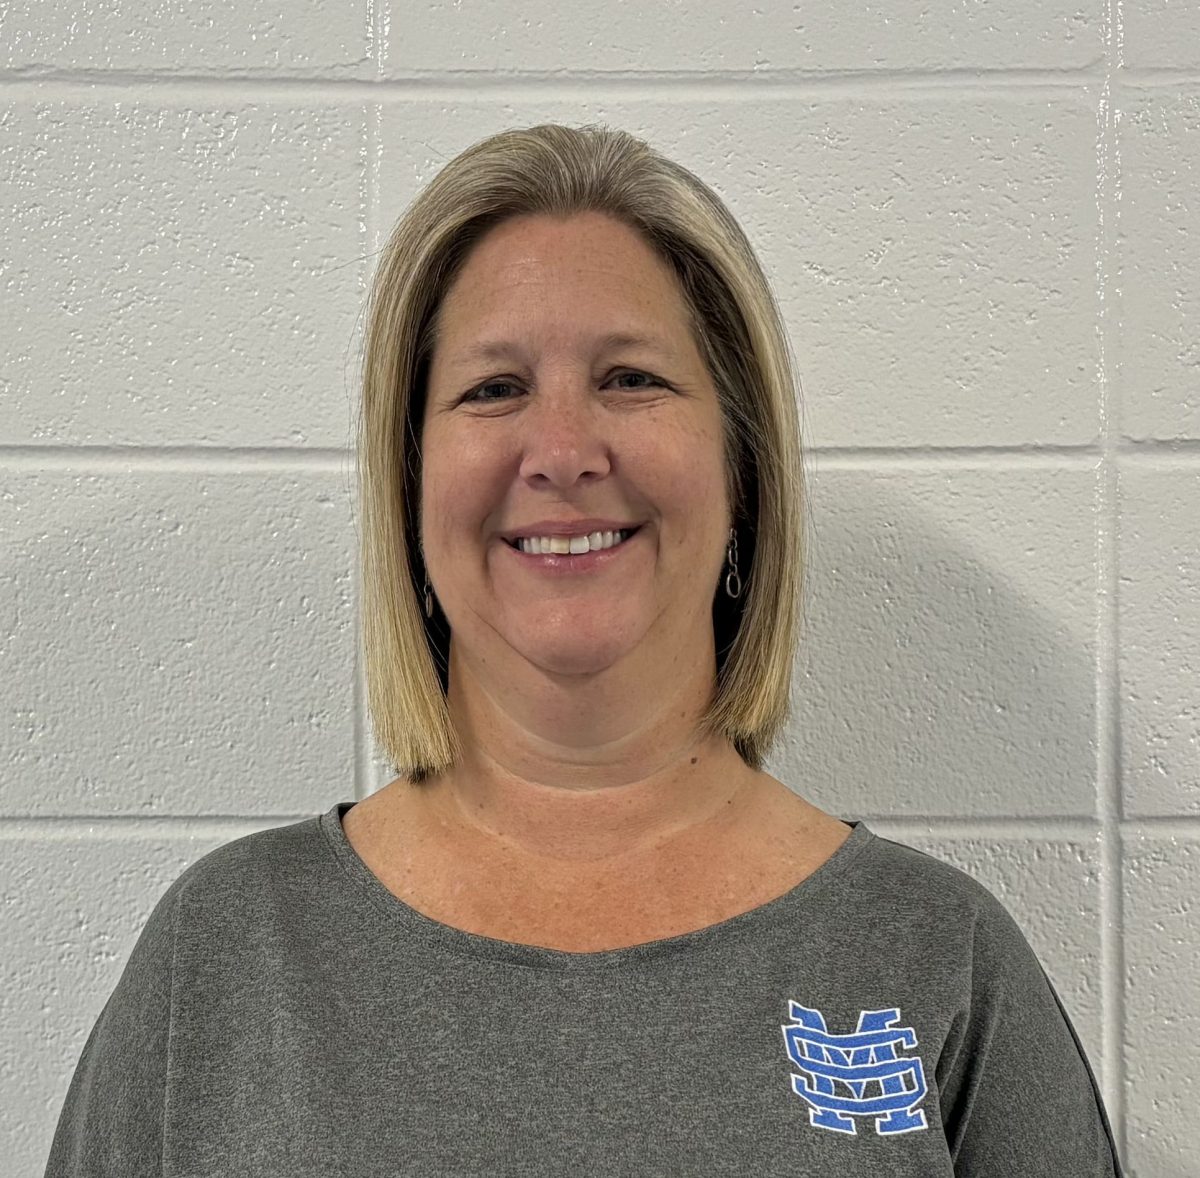 Kristin Peavyhouse teaches AP pre-calculus, accelerated algebra and geometry. Peavyhouse has been part of the Panther family for 25 years. Peavyhouse’s love of math made her become a teacher, but what really drives her is if she is able to make an impact on her students lives.